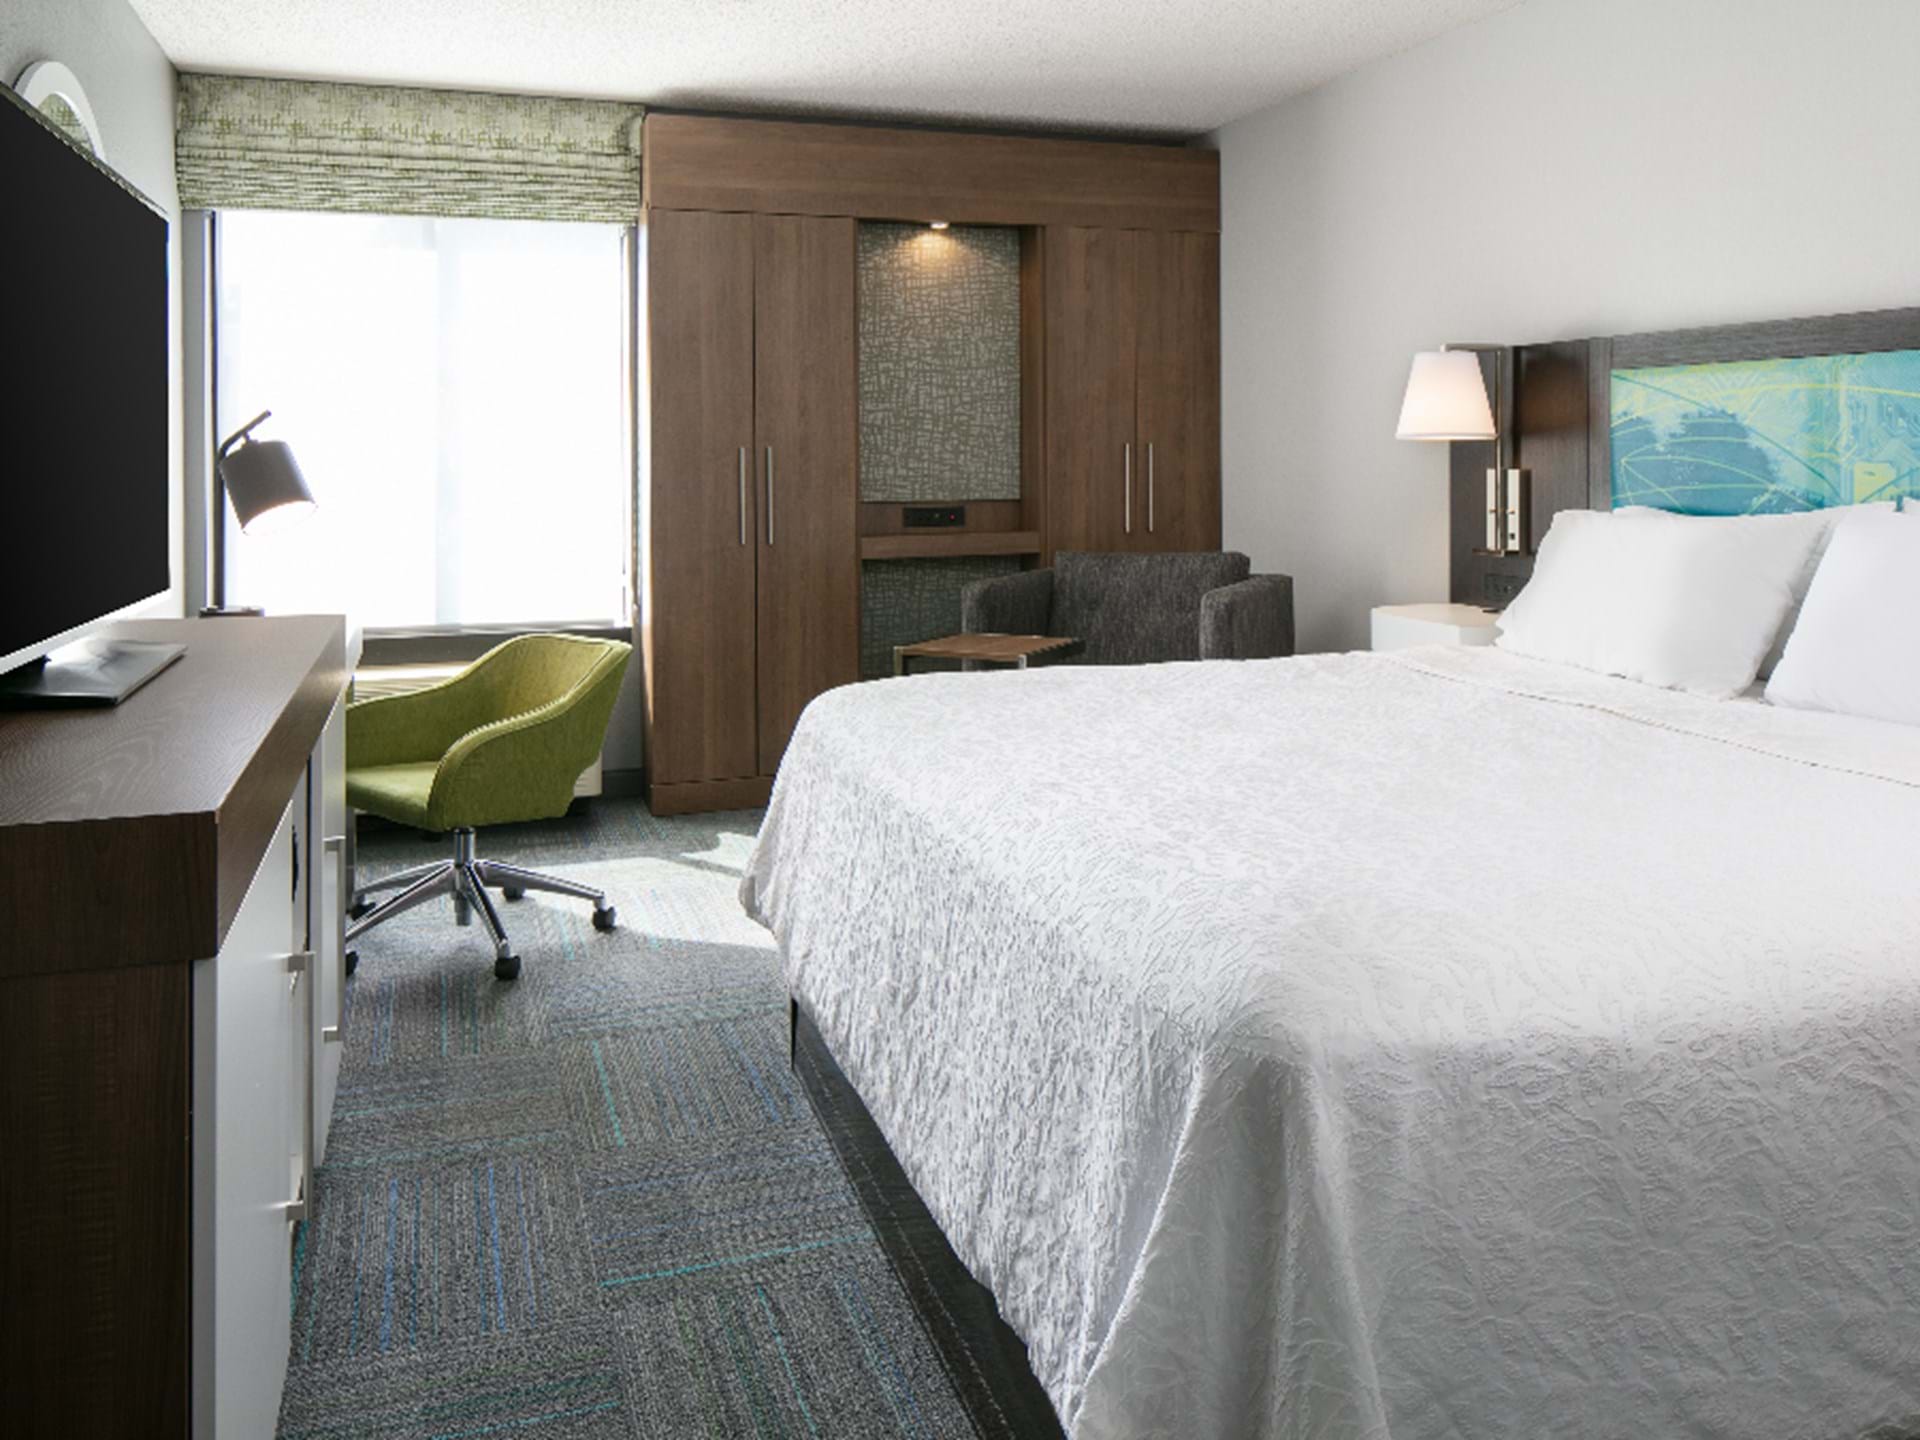 Updated guestrooms with free wi-fi